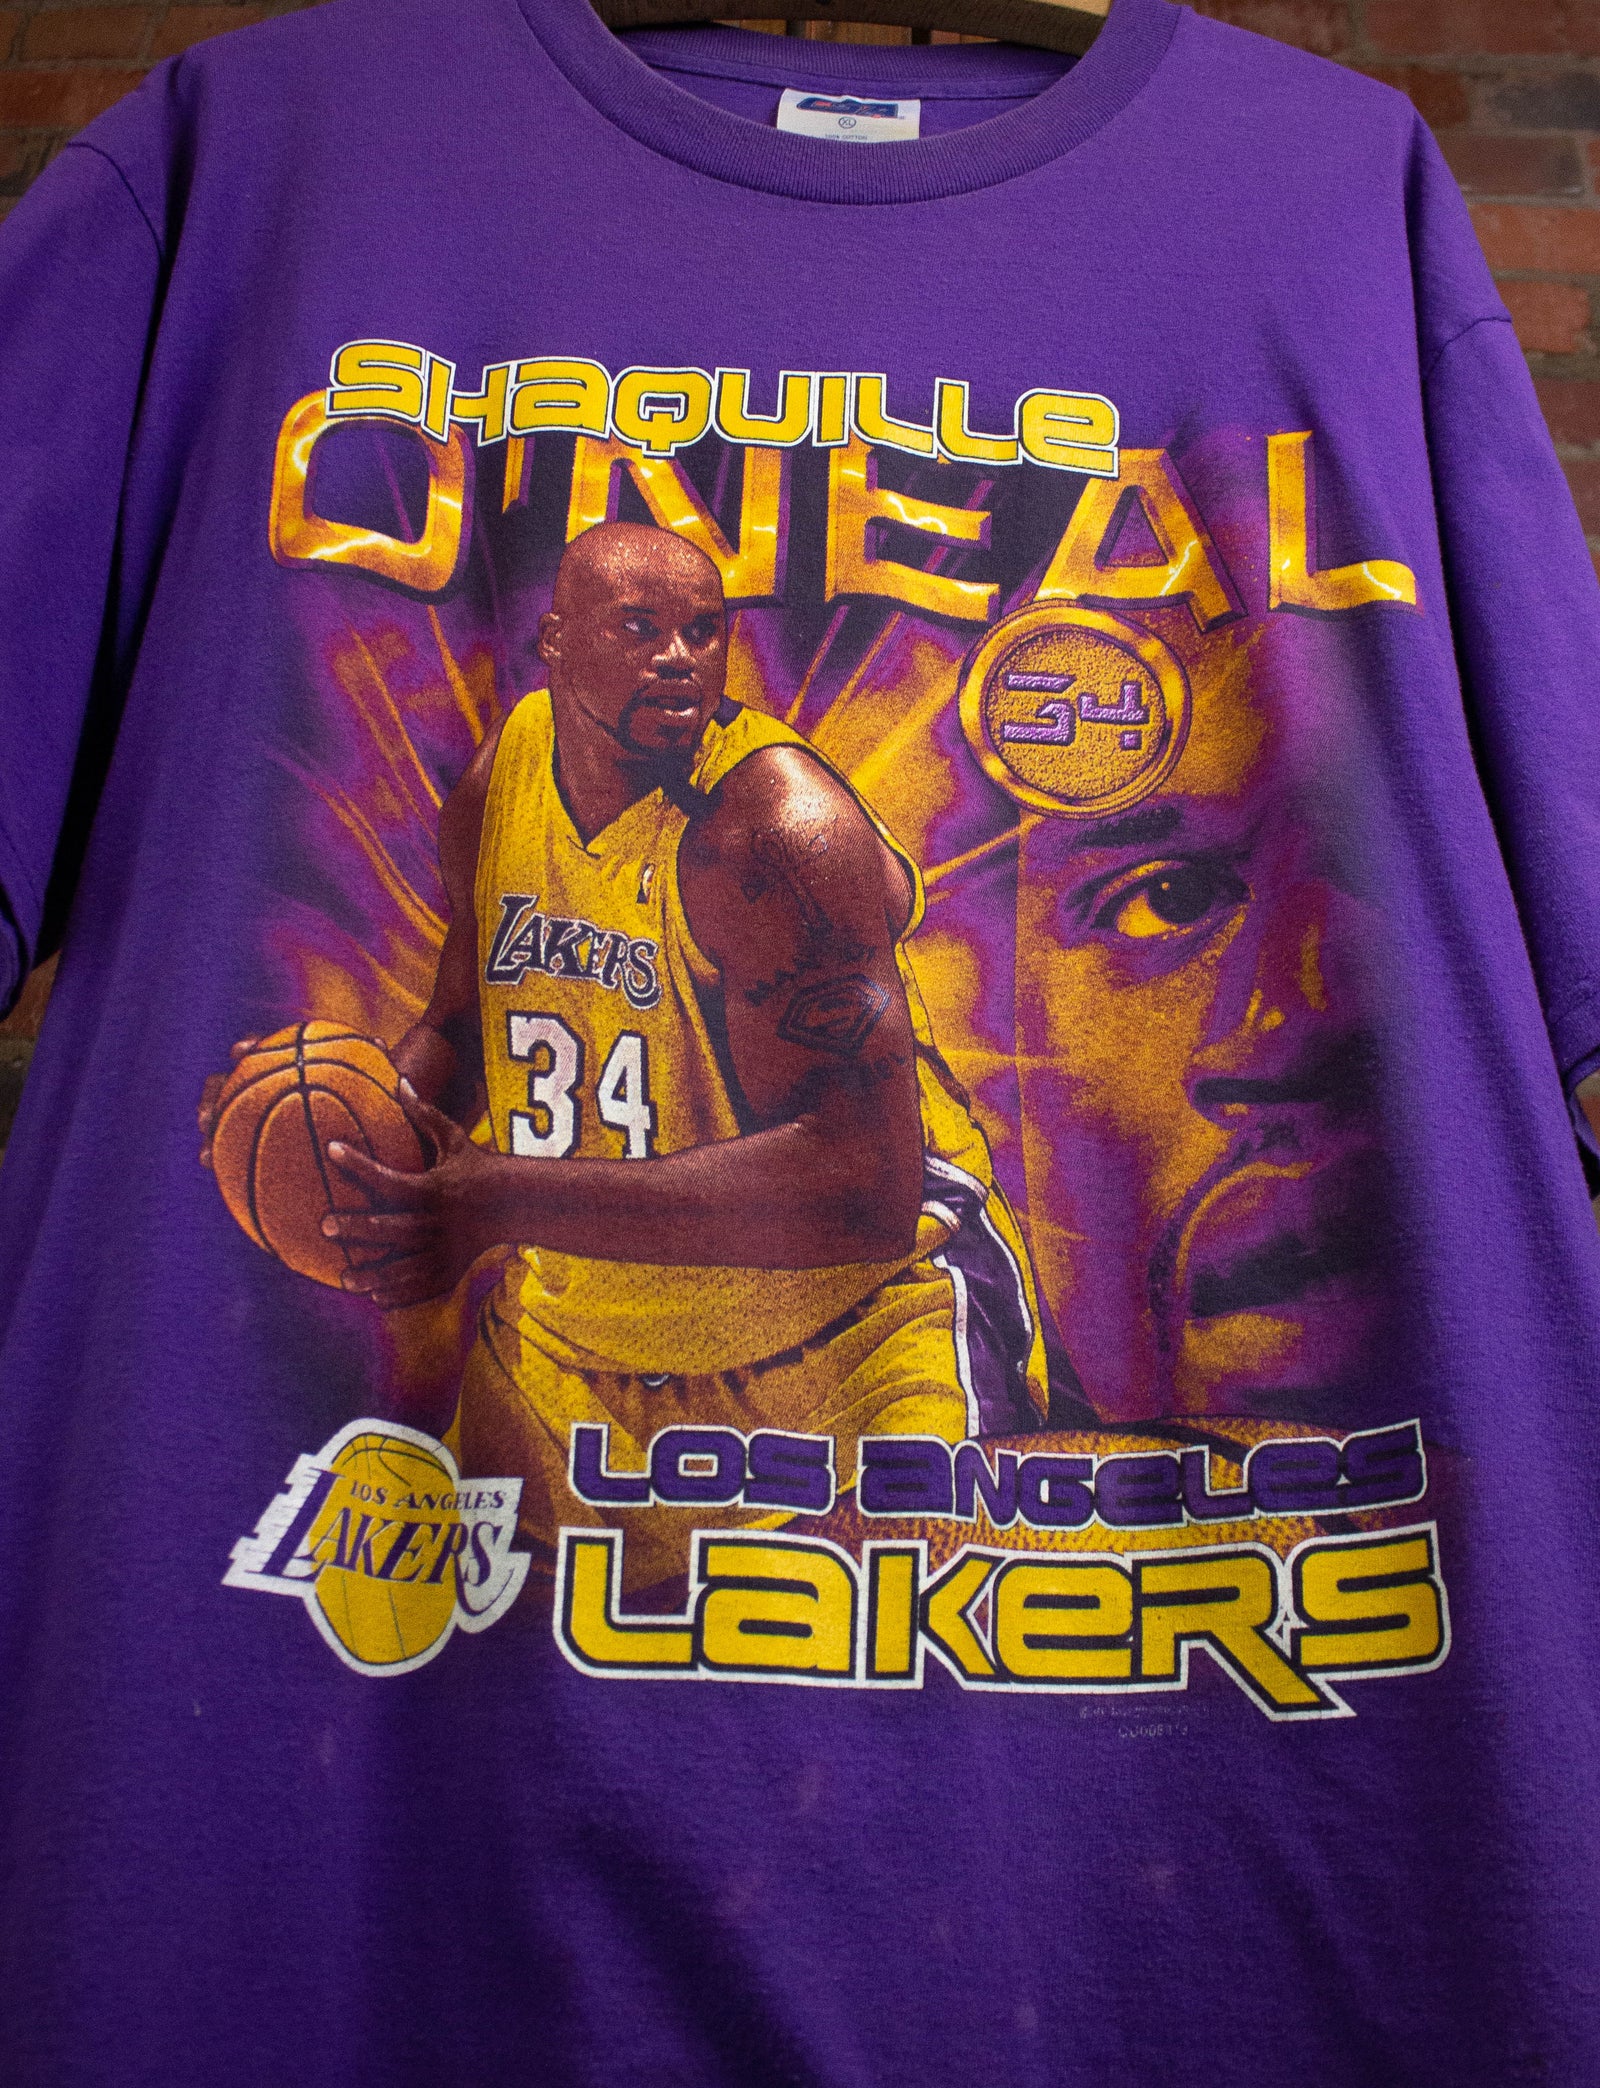 Lakers 23 Vintage T-Shirt Graphic T-Shirt Dress for Sale by